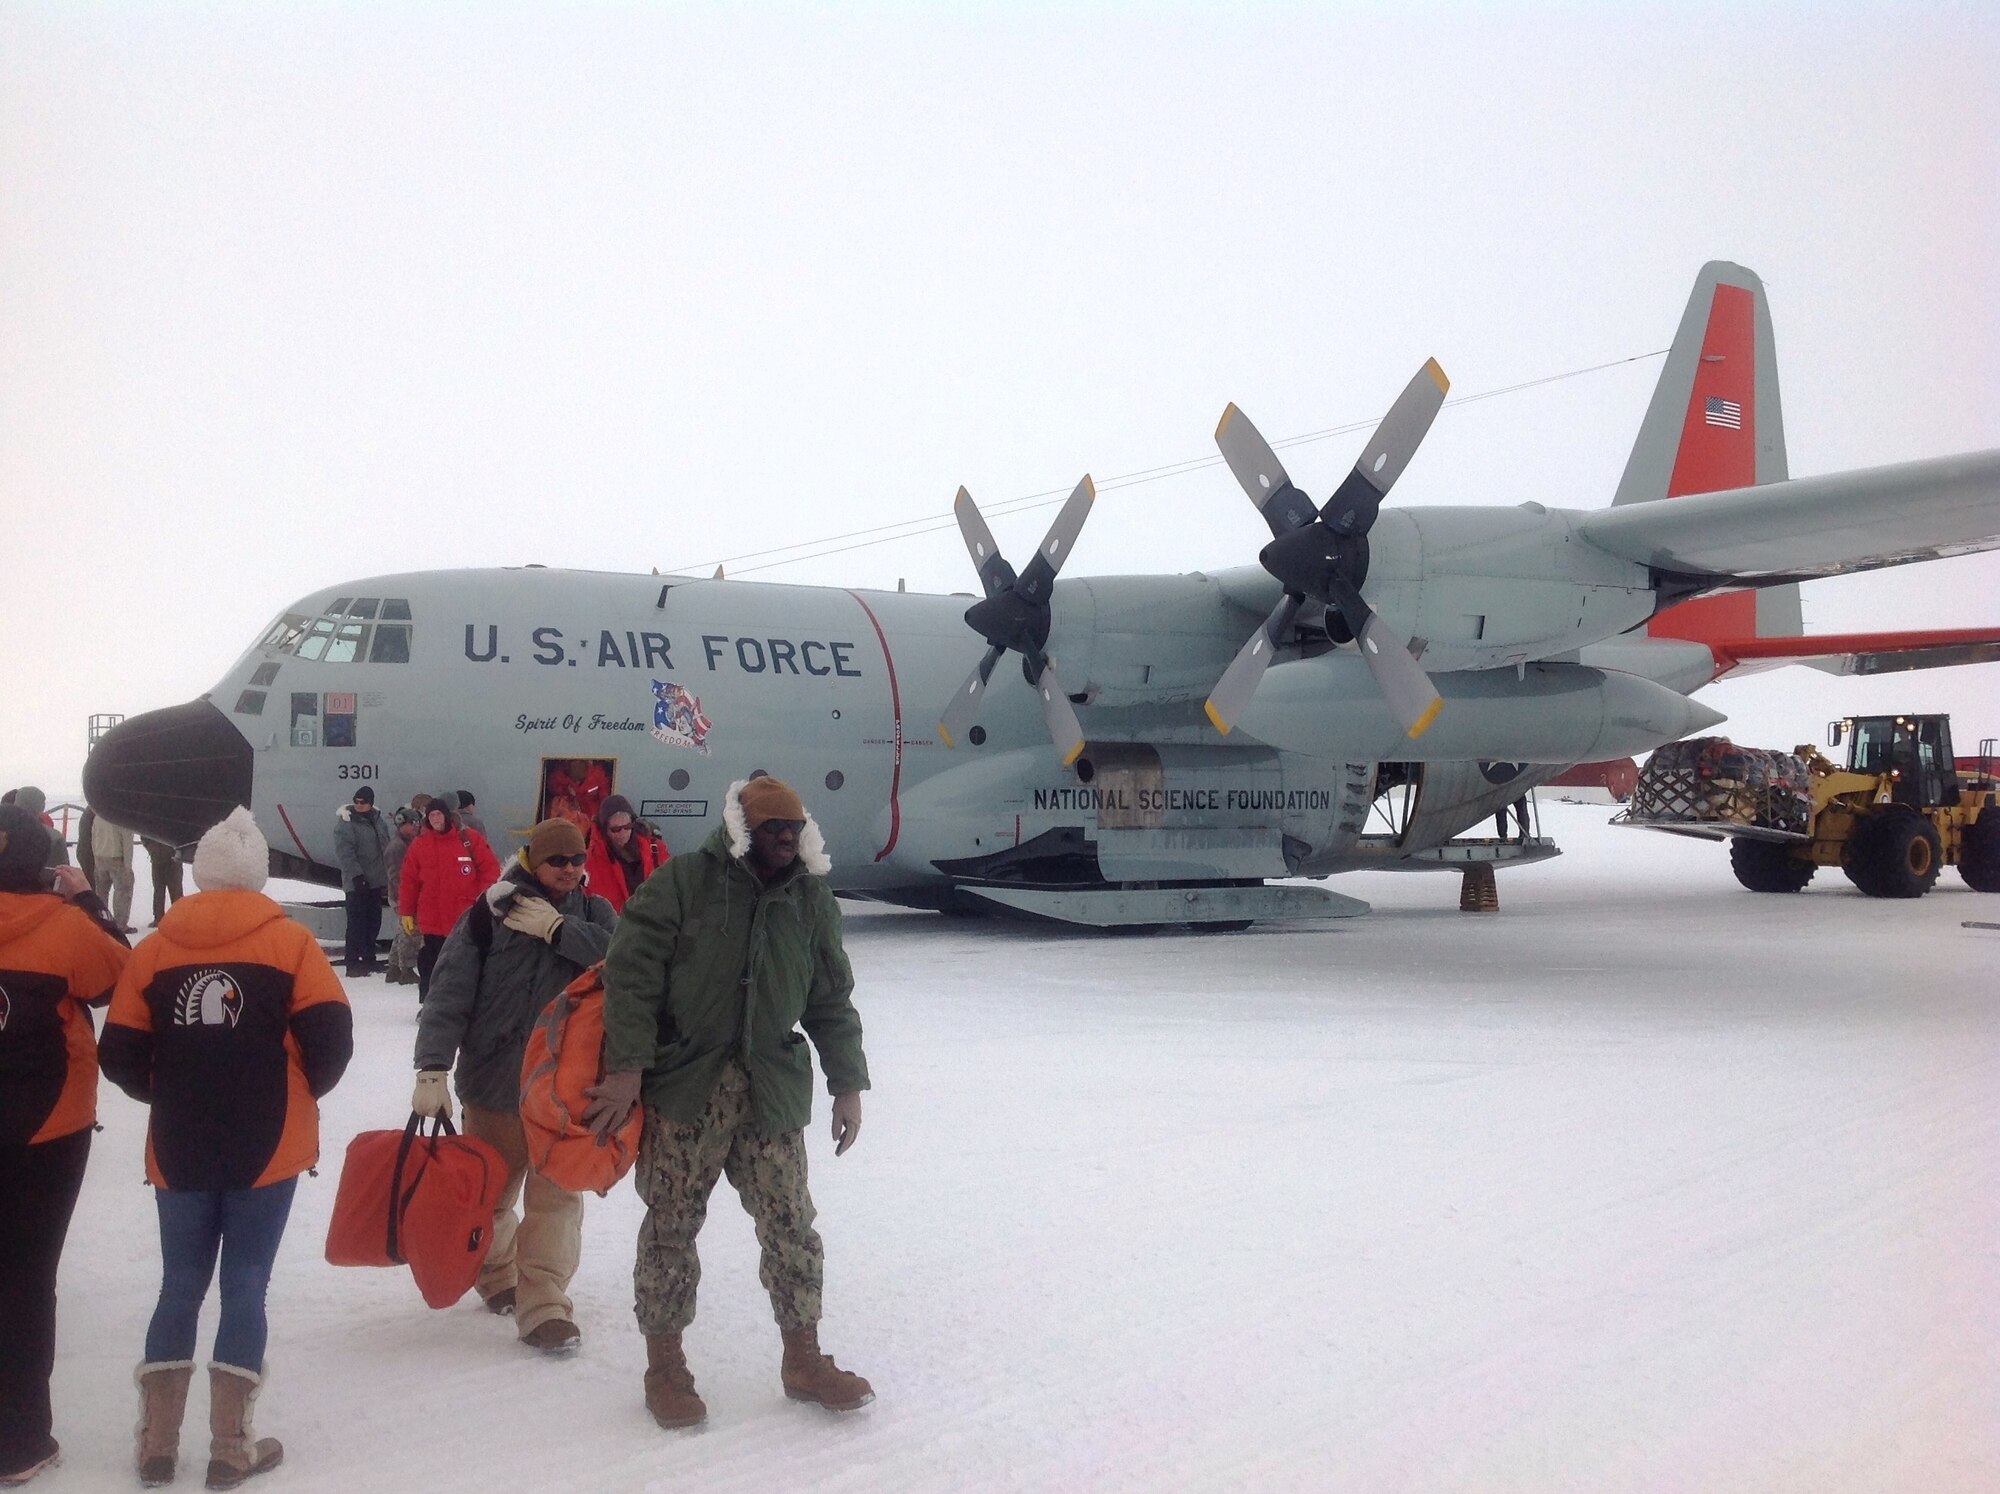 Following a seven hour flight from Christchurch, New Zealand via a C-17 military transport plane, personnel arriving at McMurdo Station, Antarctica, are greeted by freezing temperatures and clean, pristine air following a seven hour flight from Christchurch, New Zealand.